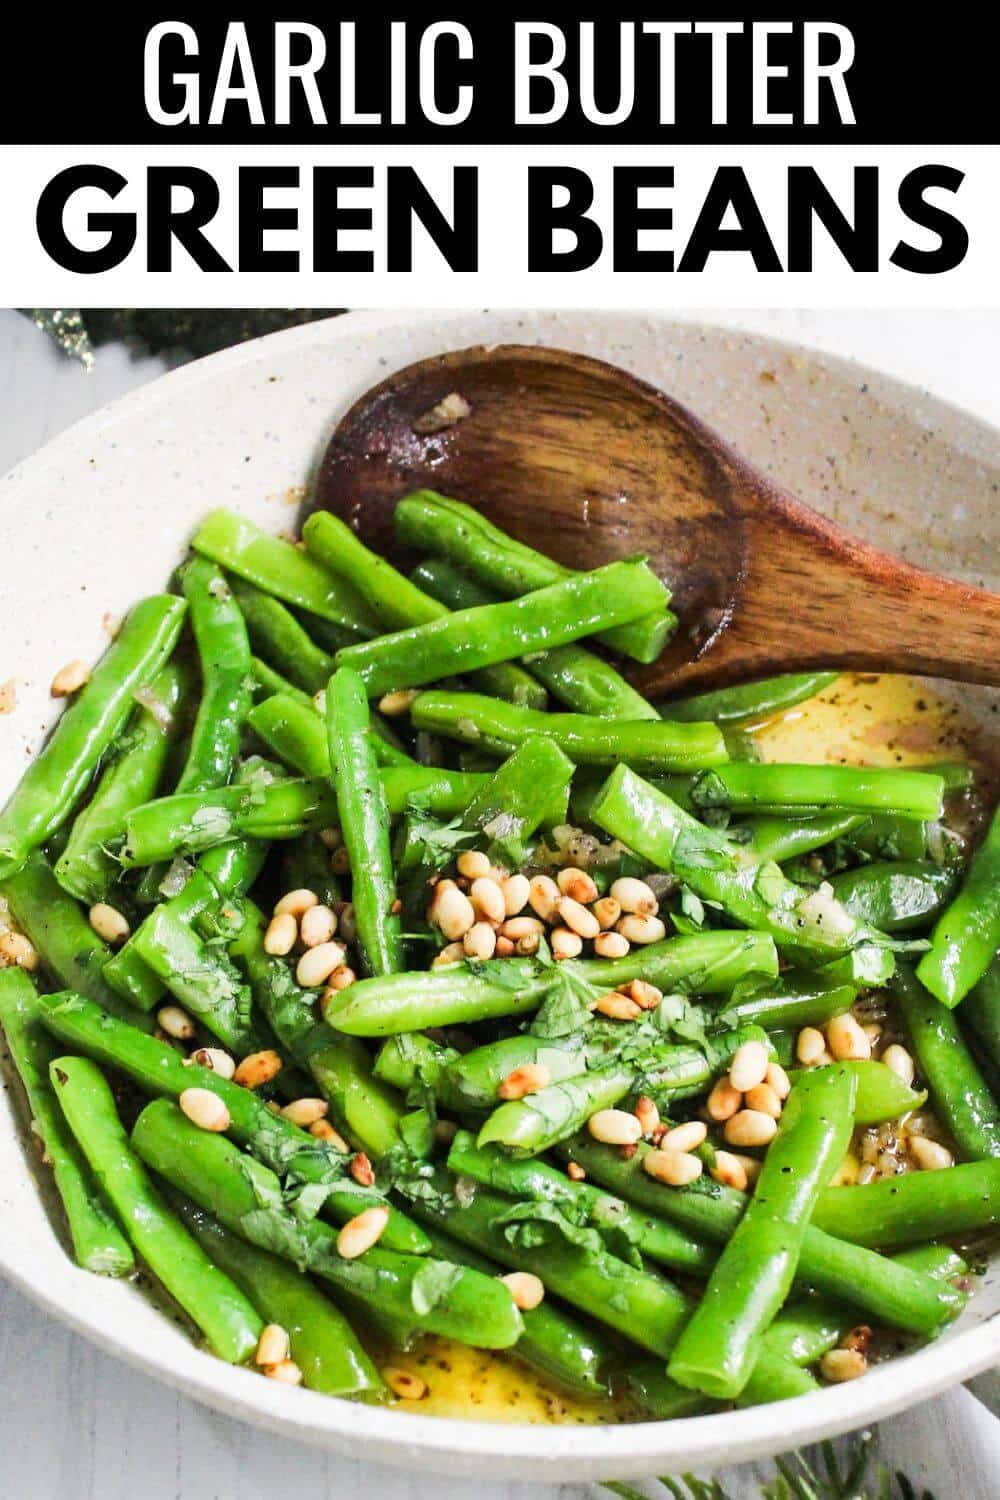 Garlic butter green beans in a bowl with a wooden spoon.